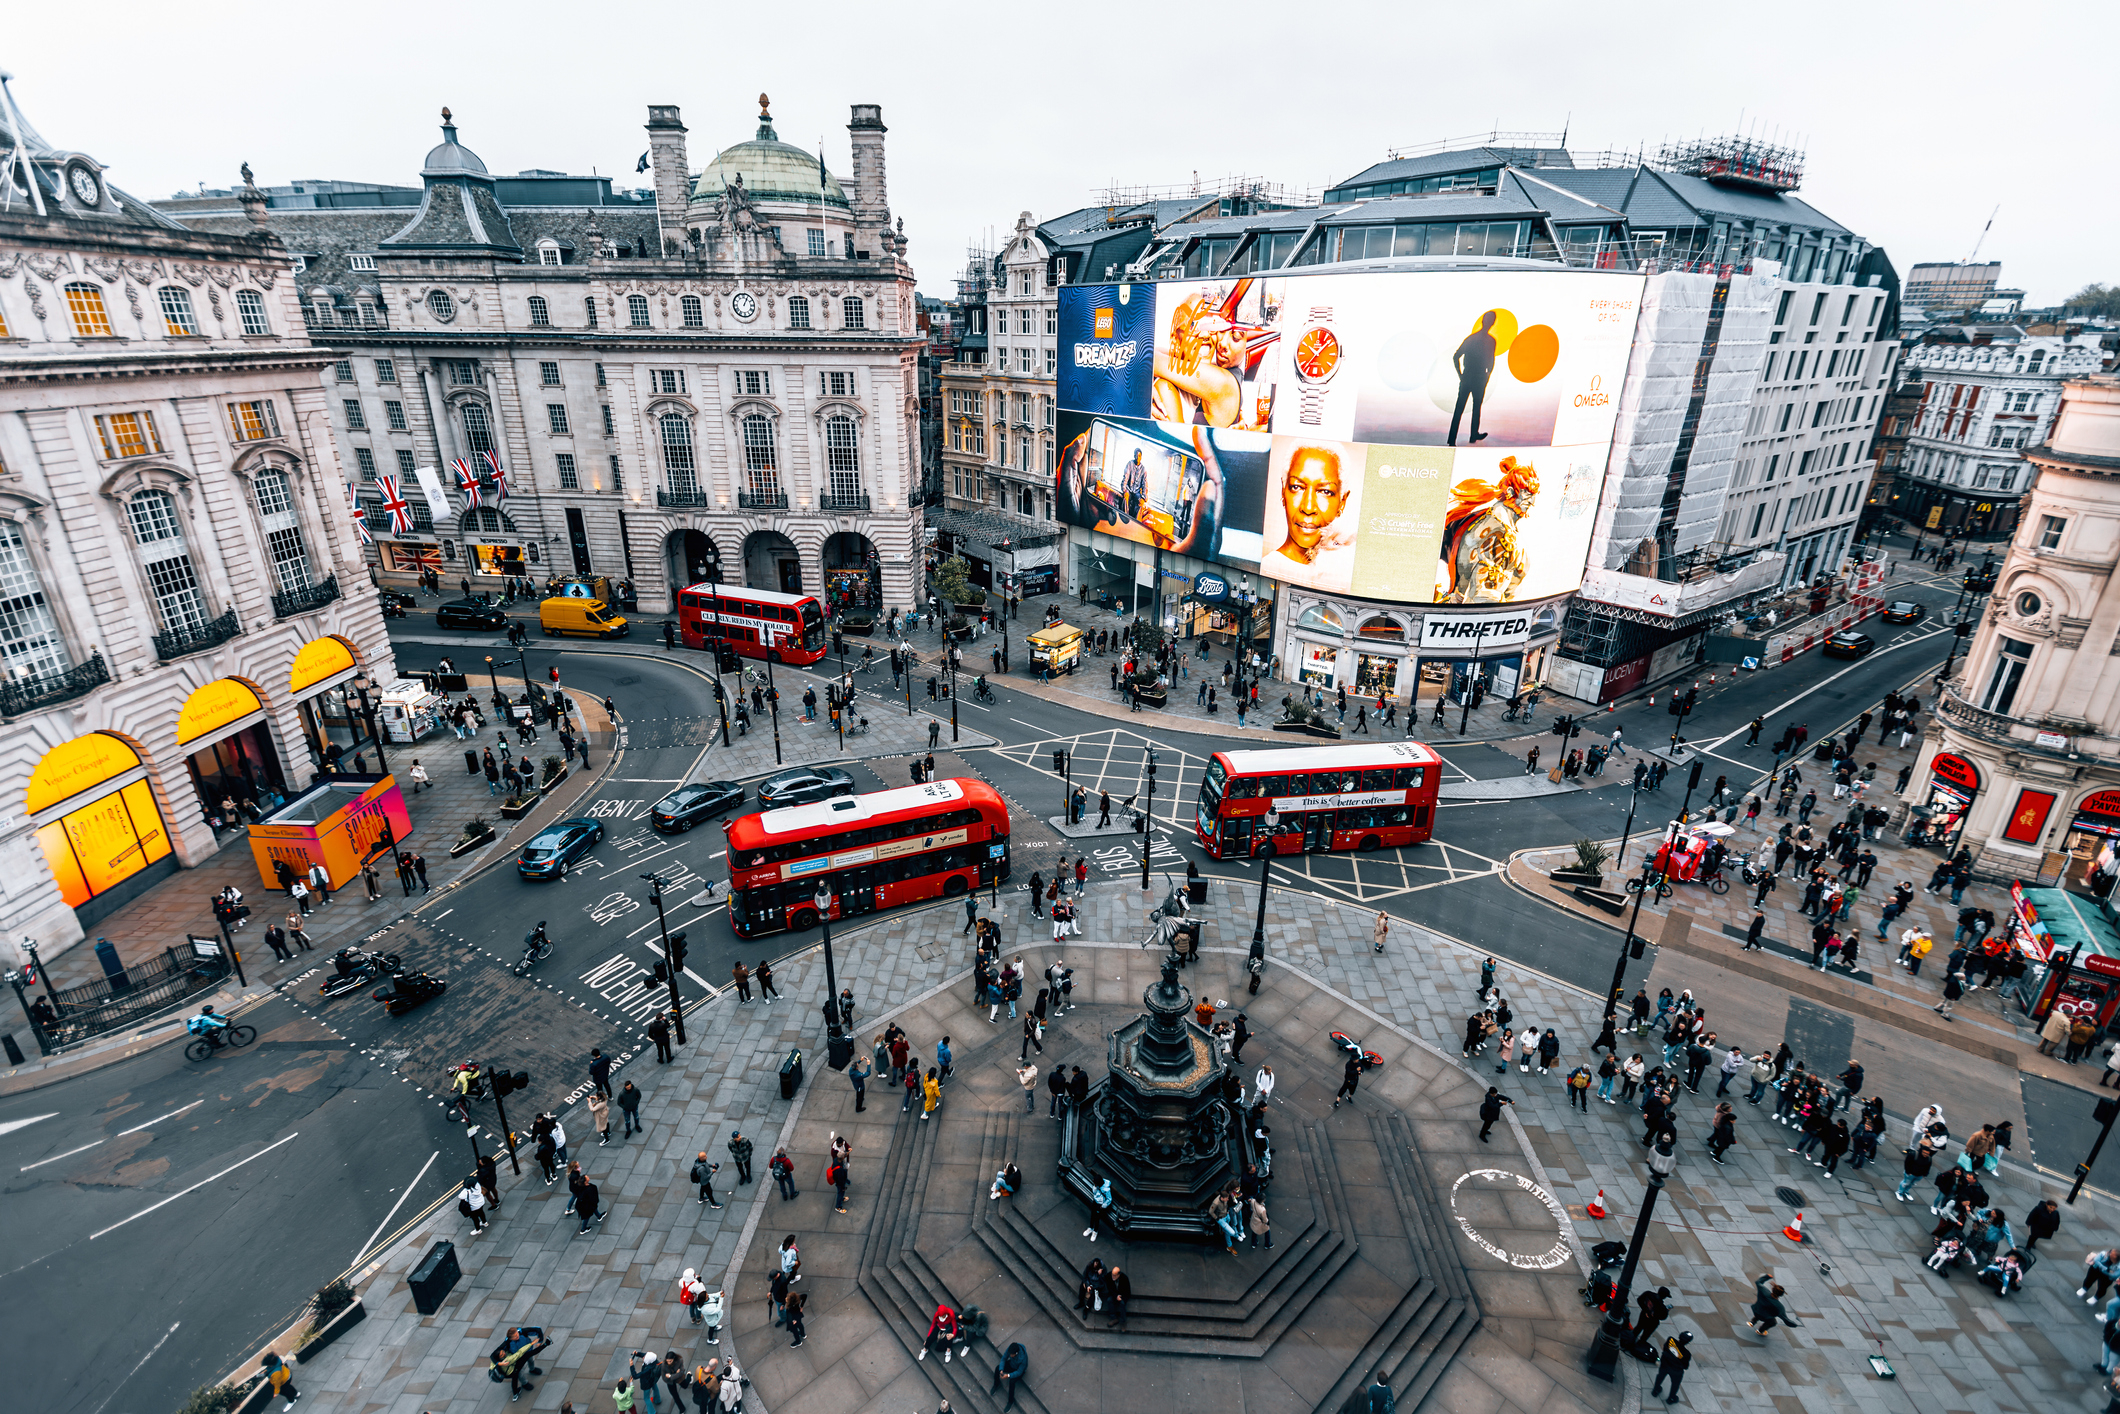 Aerial view of Piccadilly Circus in London with buses and pedestrians